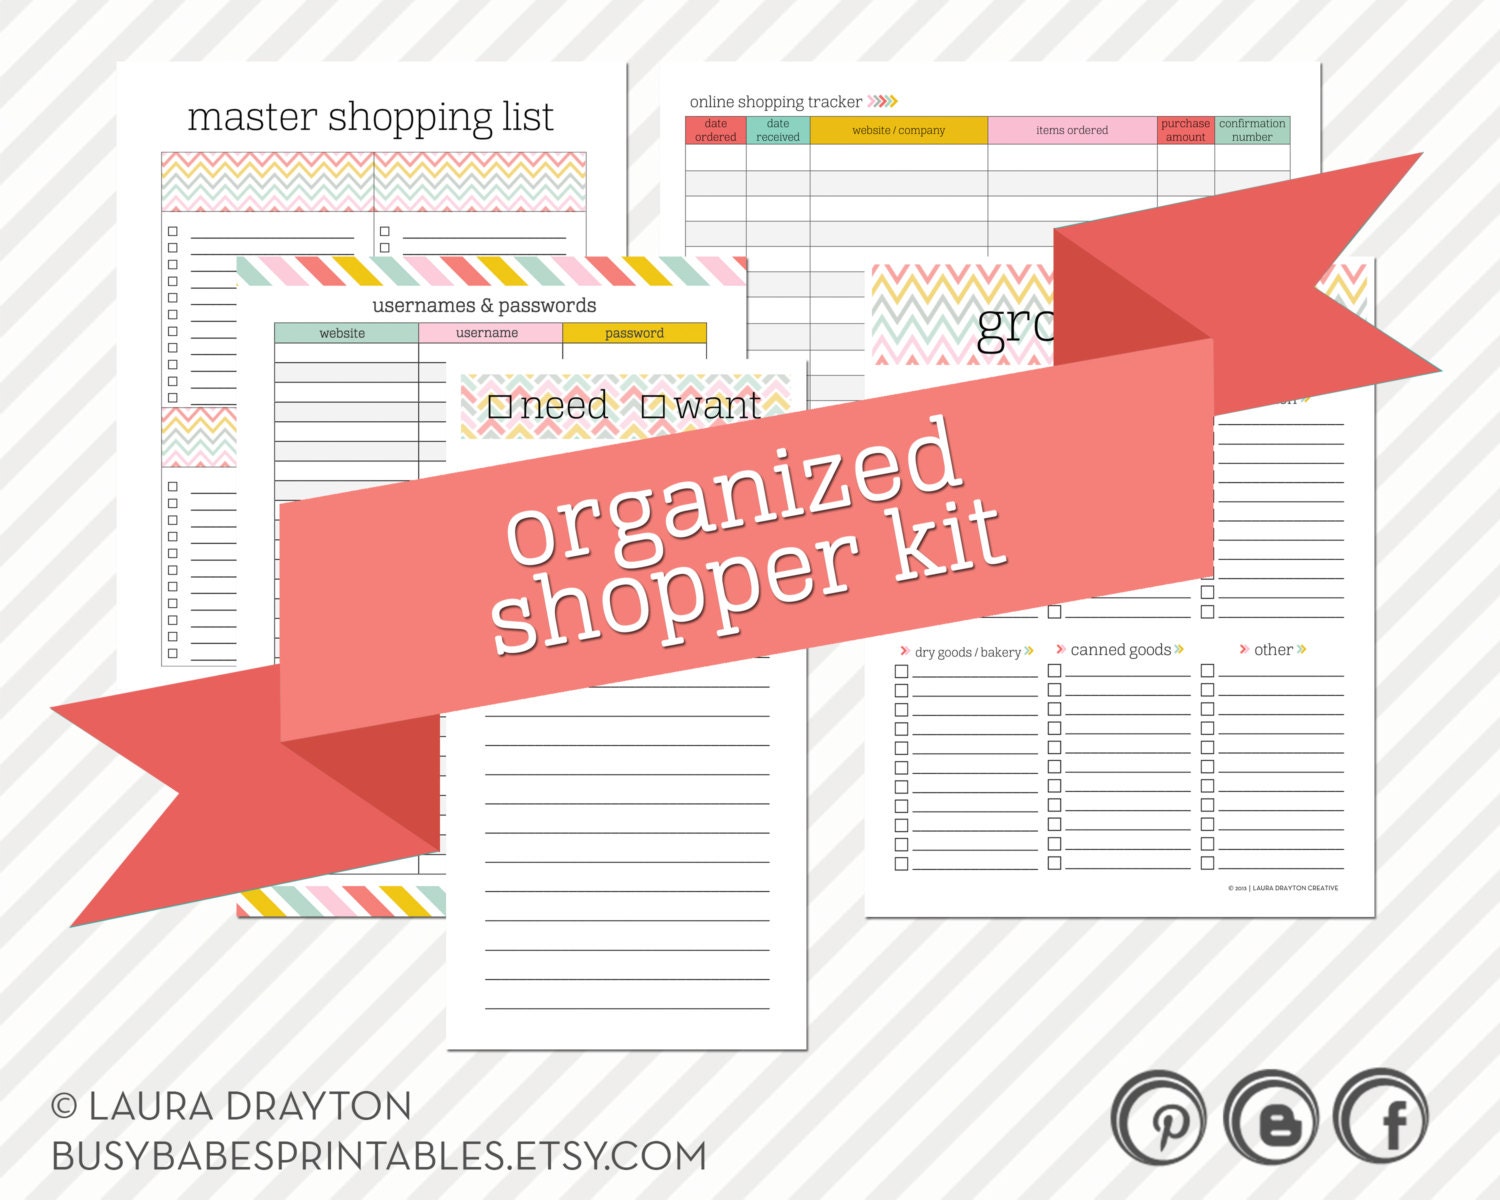 Organized Shopper Kit - Printable Shopping Lists, and Online Username and Passwords Tracker - INSTANT DOWNLOAD